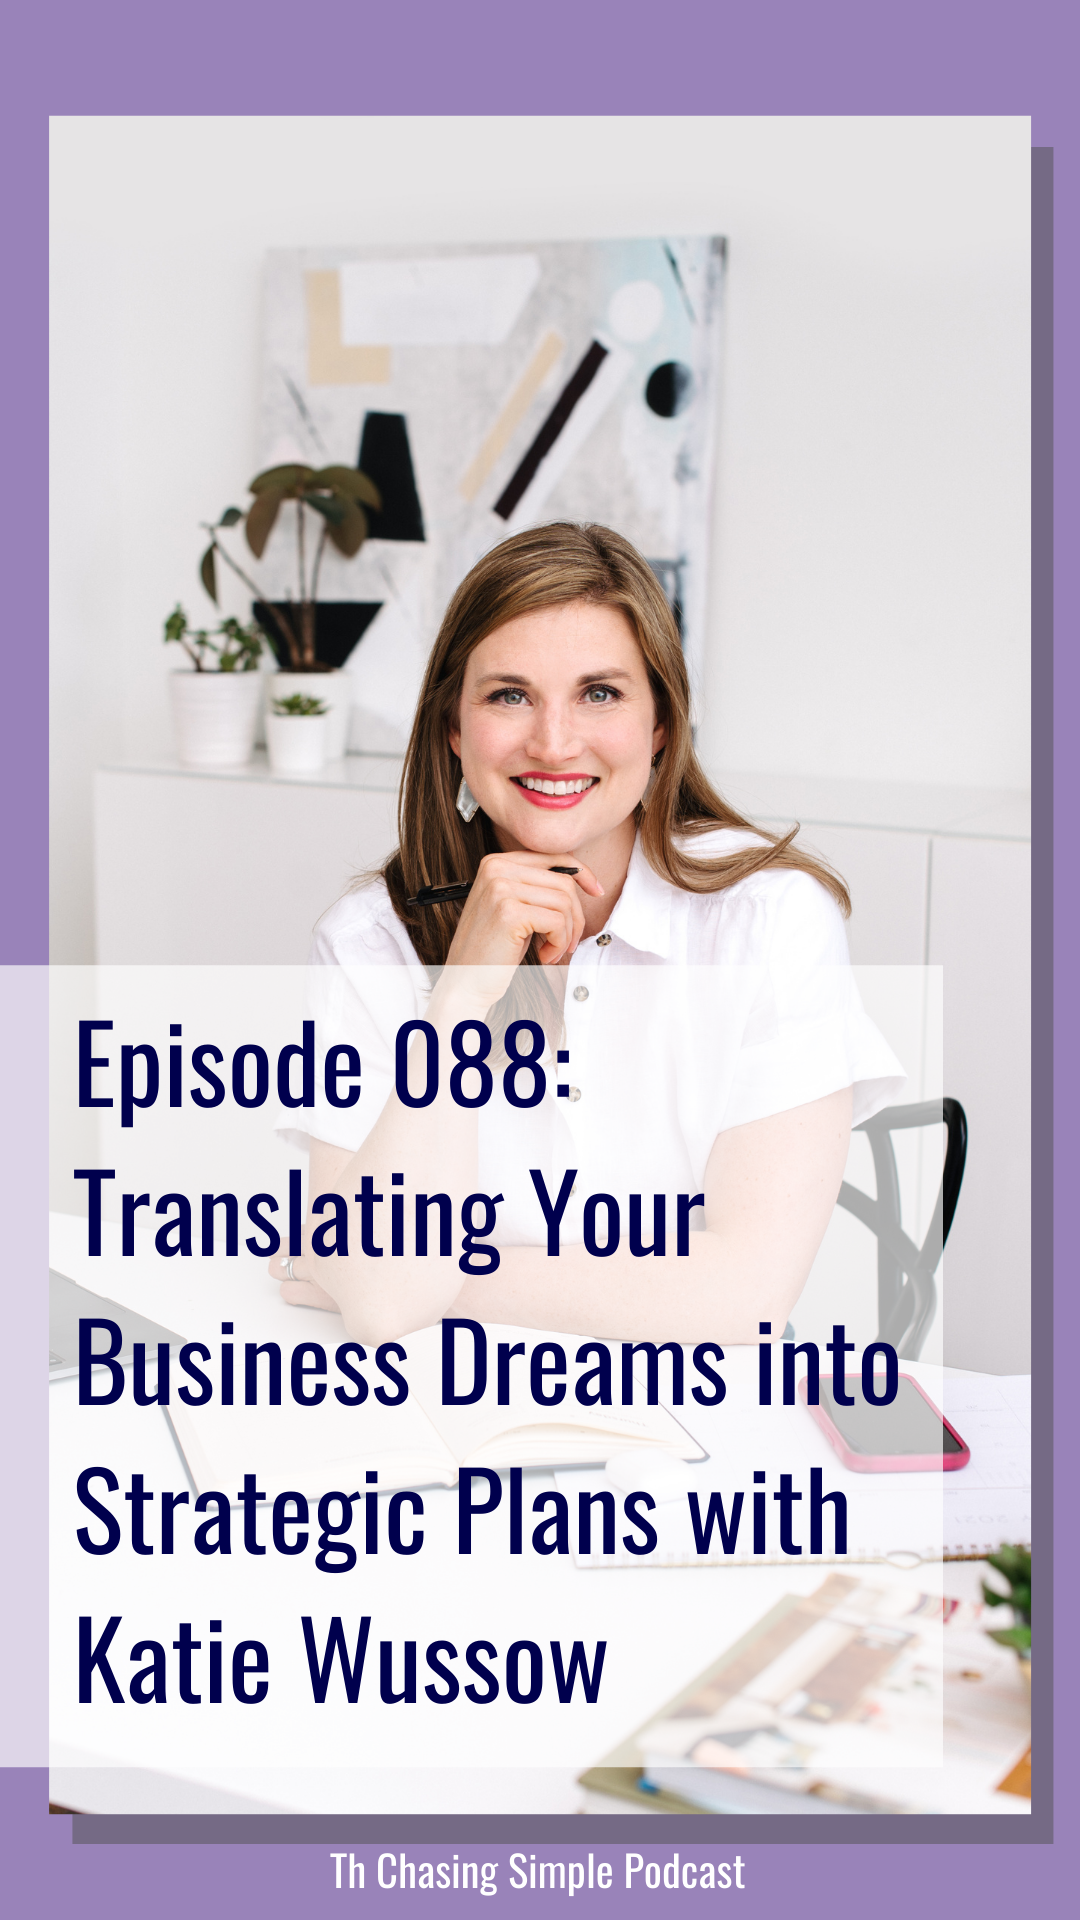 Katie Wussow is sharing all about small business strategic planning to turn your big dreams into reality in this week's podcast episode!